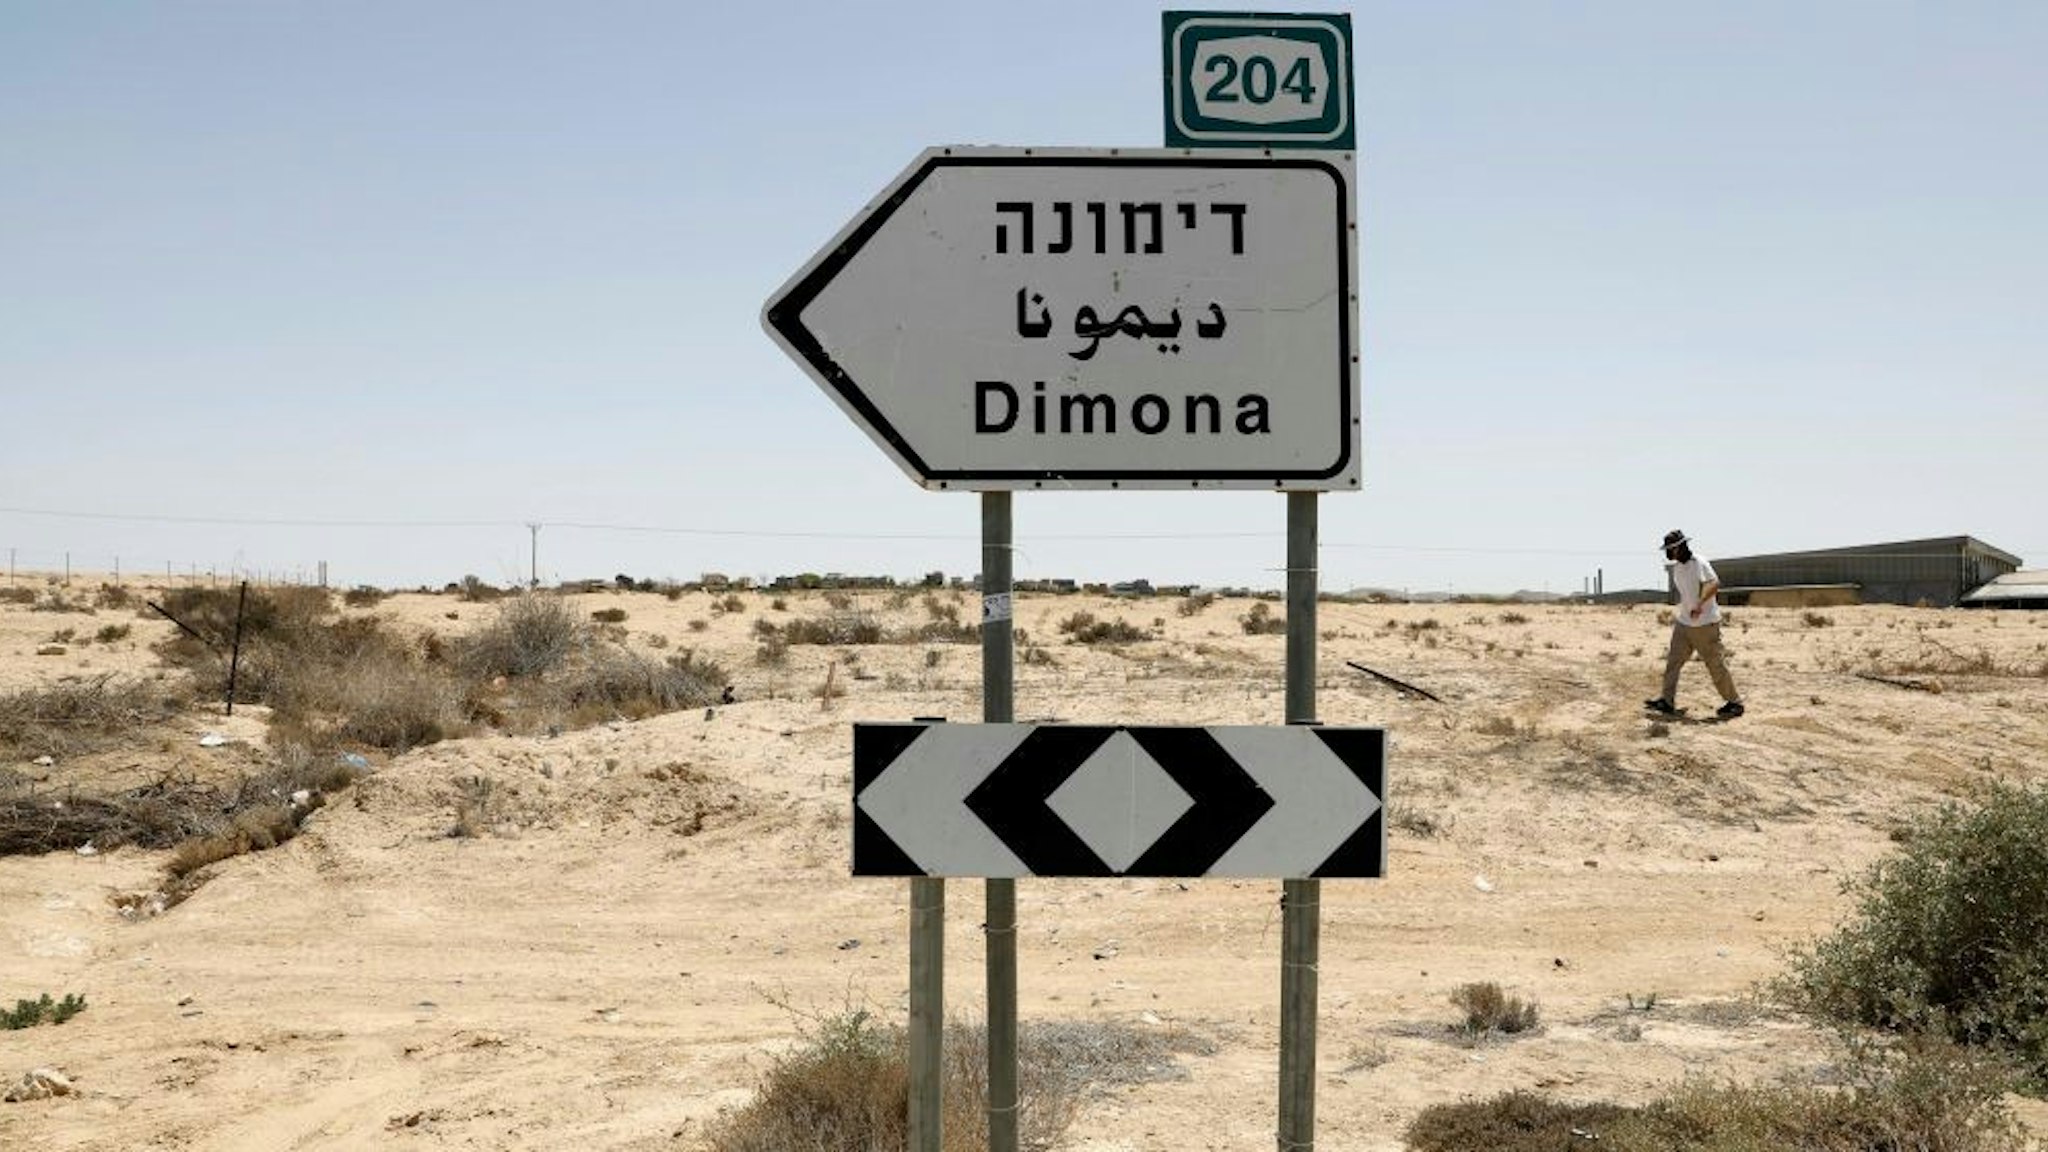 This picture taken on April 22, 2021 shows a view of a road sign directing towards the city of Dimona, close to the nuclear power plant in the southern Israeli Negev desert. (Photo by Ahmad GHARABLI / AFP) (Photo by